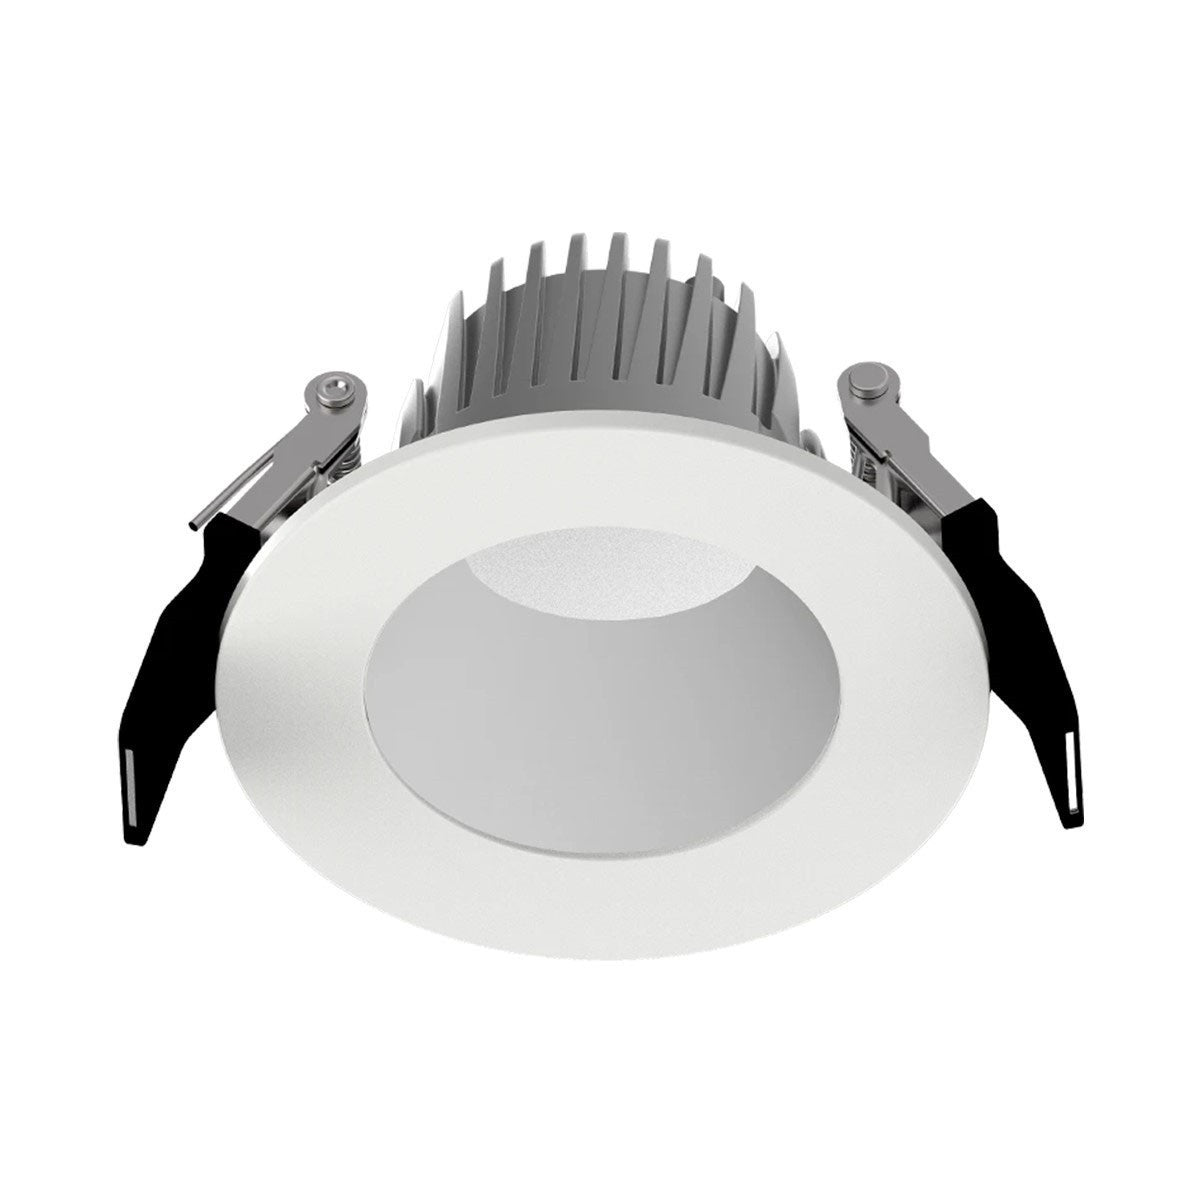 4 Inch LED Deep Regress Commercial Downlight, Field Adjustable 8/10/11W, 500/600/700 Lumens, 30/35/40/50K, Smooth Trim, Matte Silver Finish